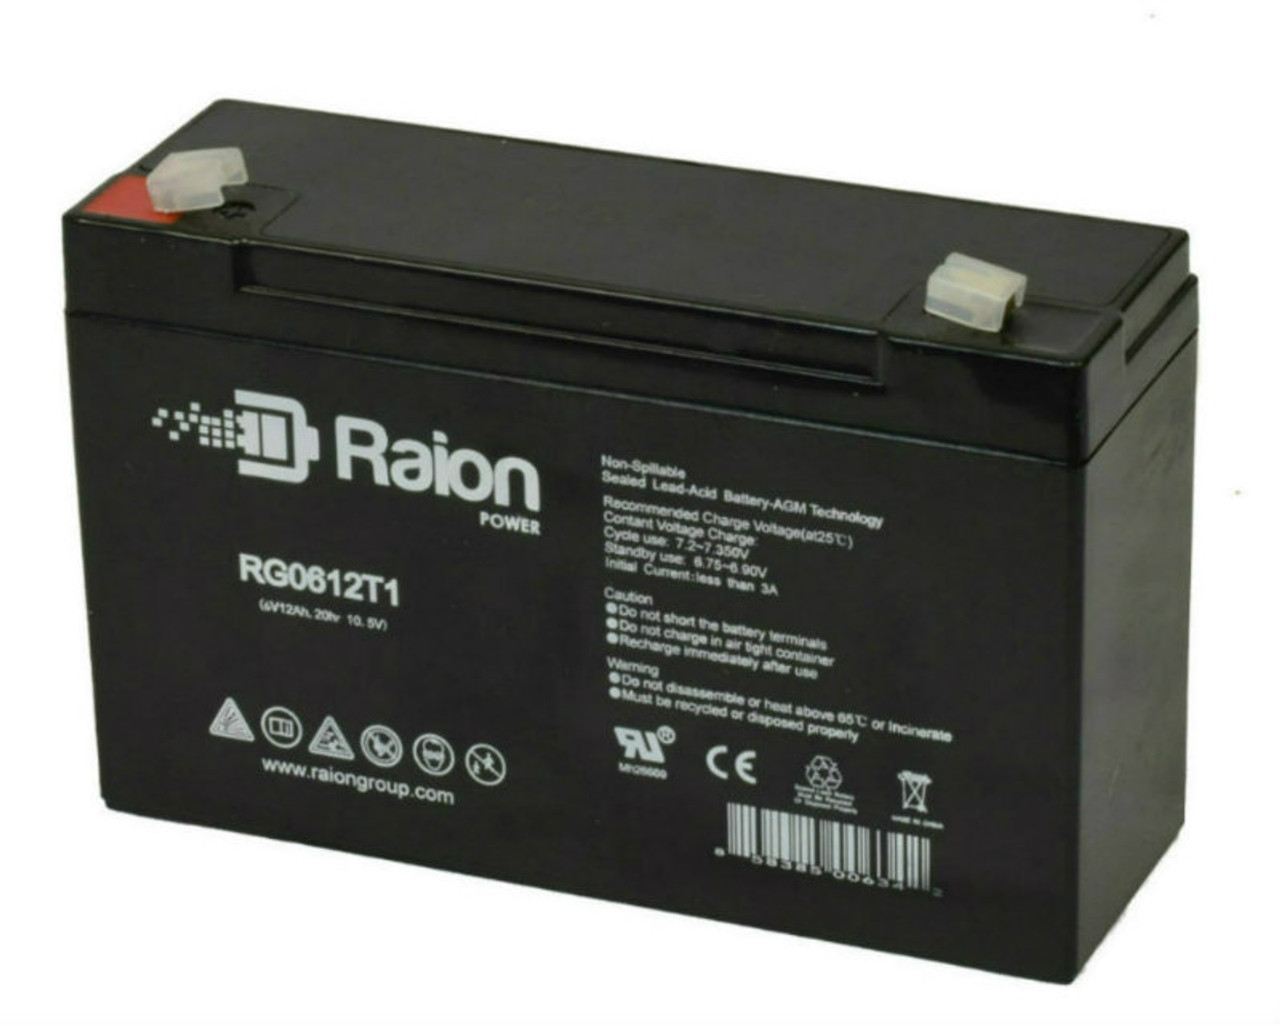 Raion Power RG06120T1 Replacement Battery for Starlight SA6-10